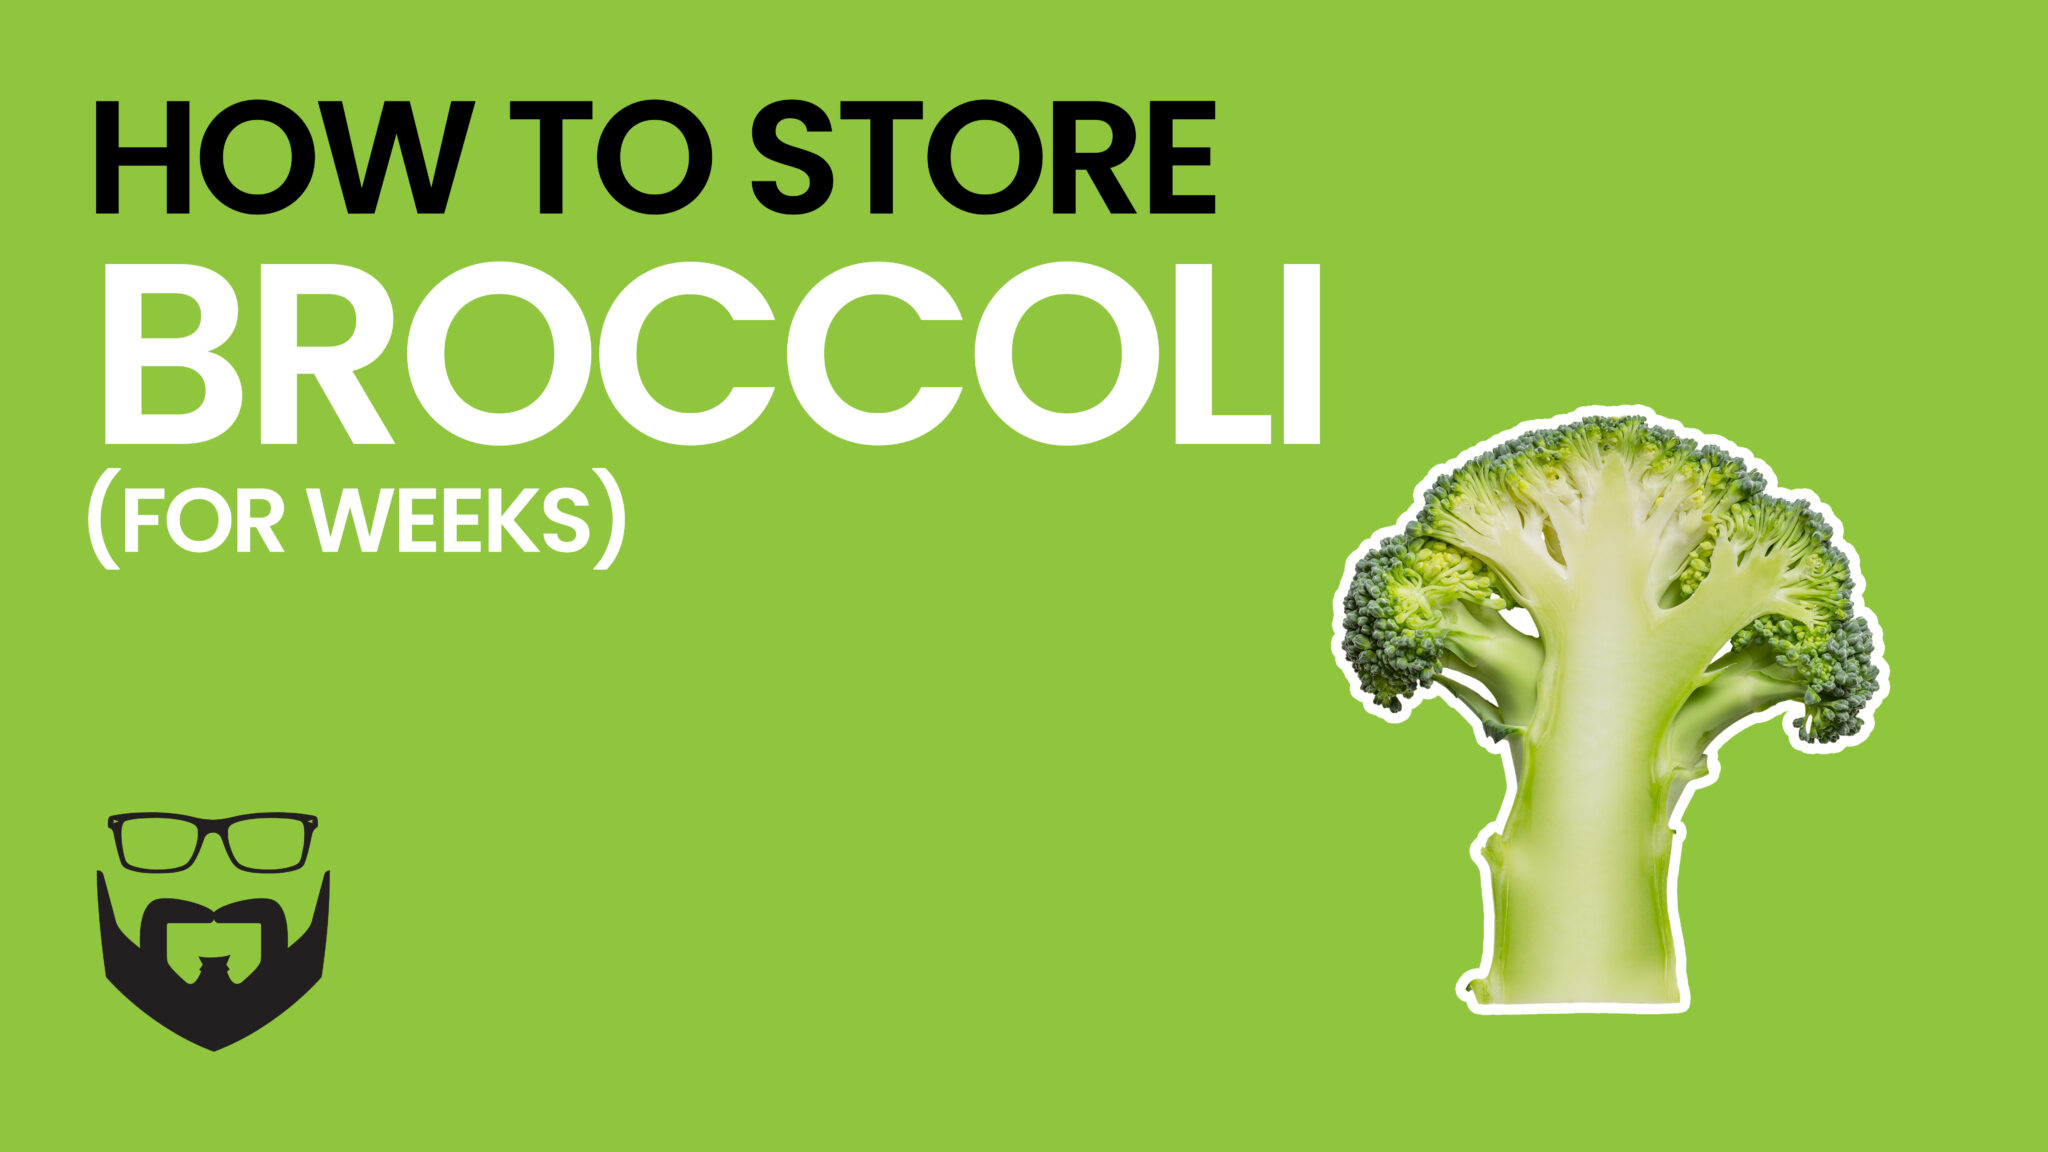 How to Store Broccoli for Weeks Video - Green